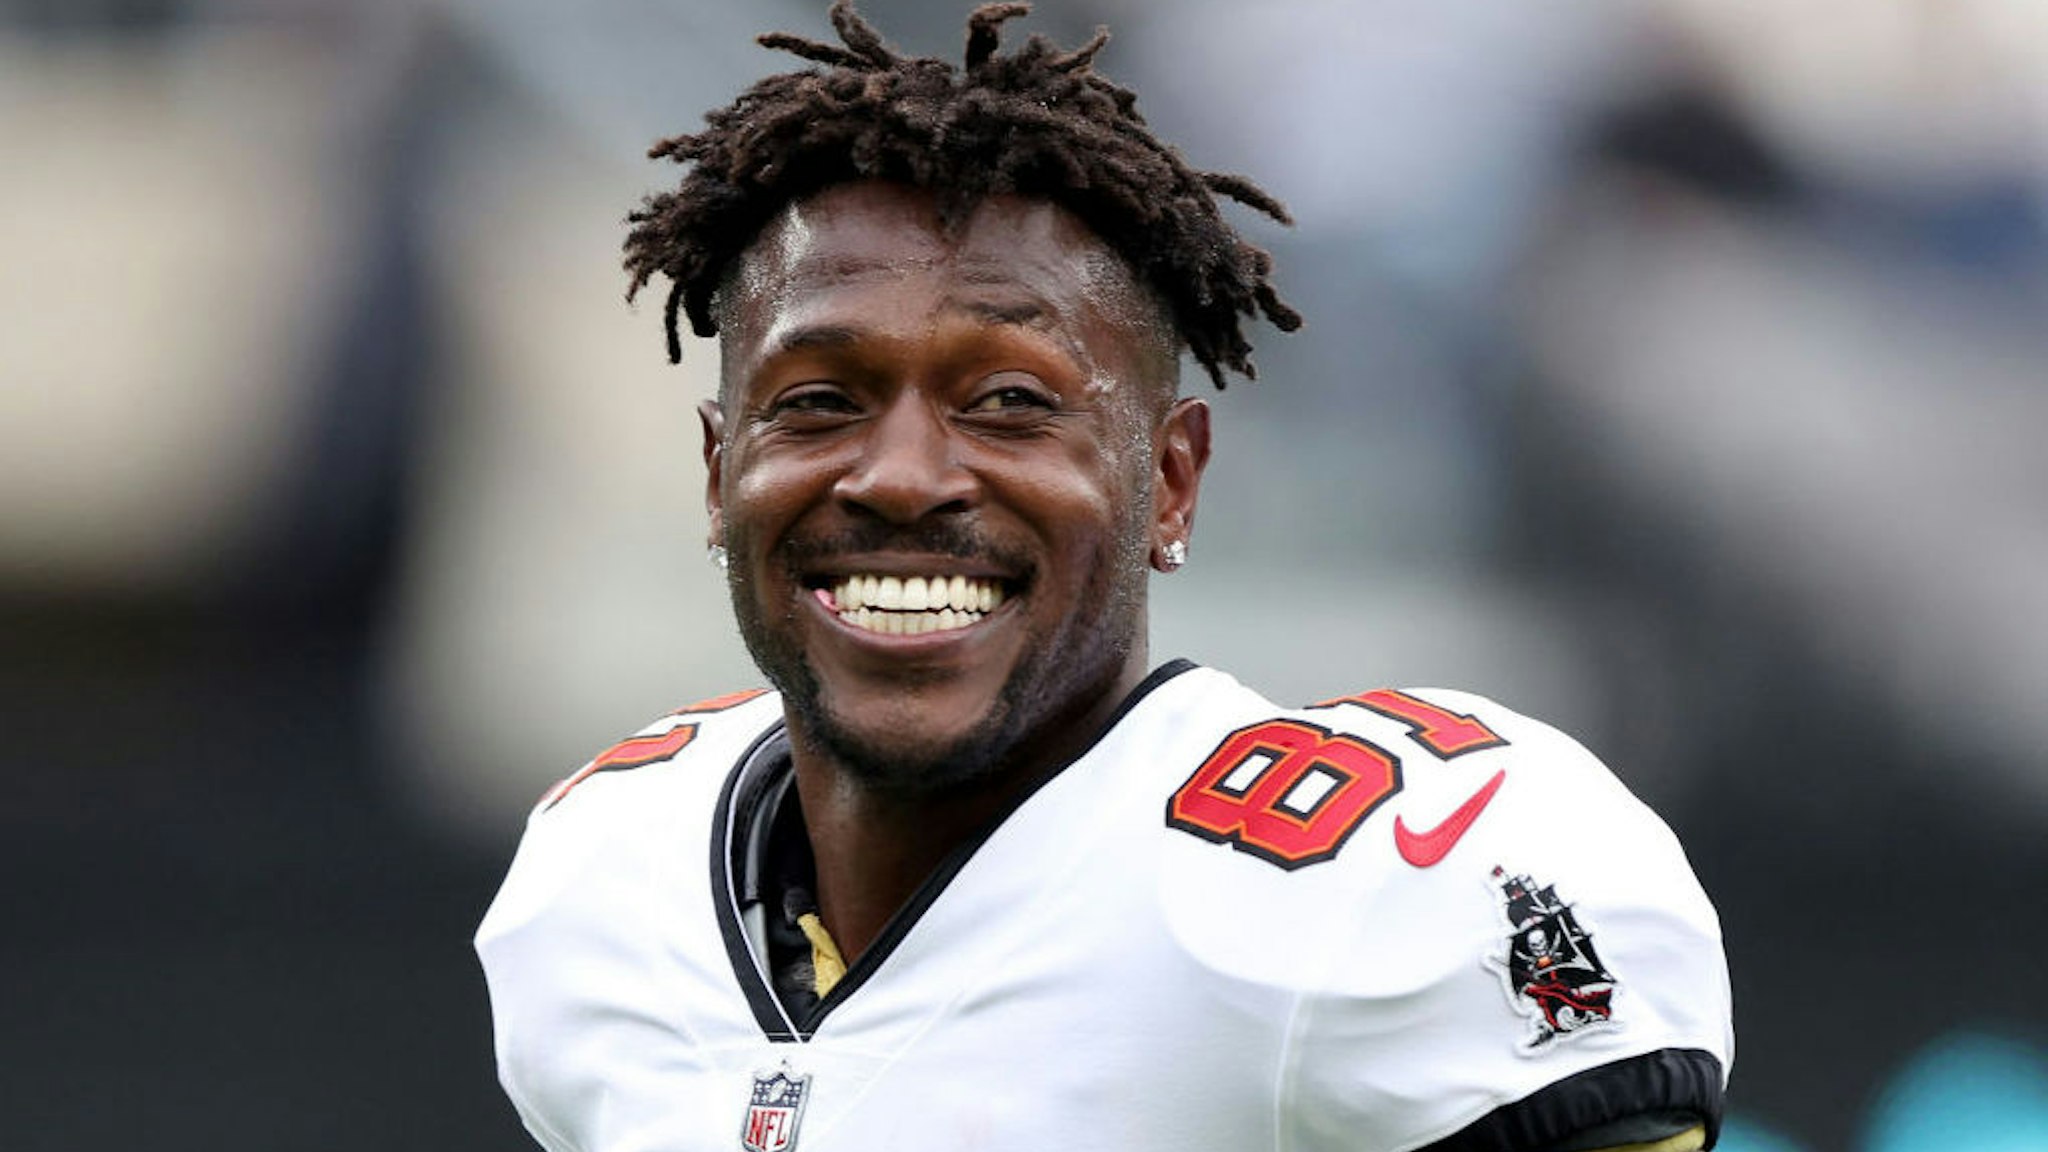 EAST RUTHERFORD, NEW JERSEY - JANUARY 02: Antonio Brown #81 of the Tampa Bay Buccaneers warms up prior to the game against the New York Jets at MetLife Stadium on January 02, 2022 in East Rutherford, New Jersey. (Photo by Elsa/Getty Images)